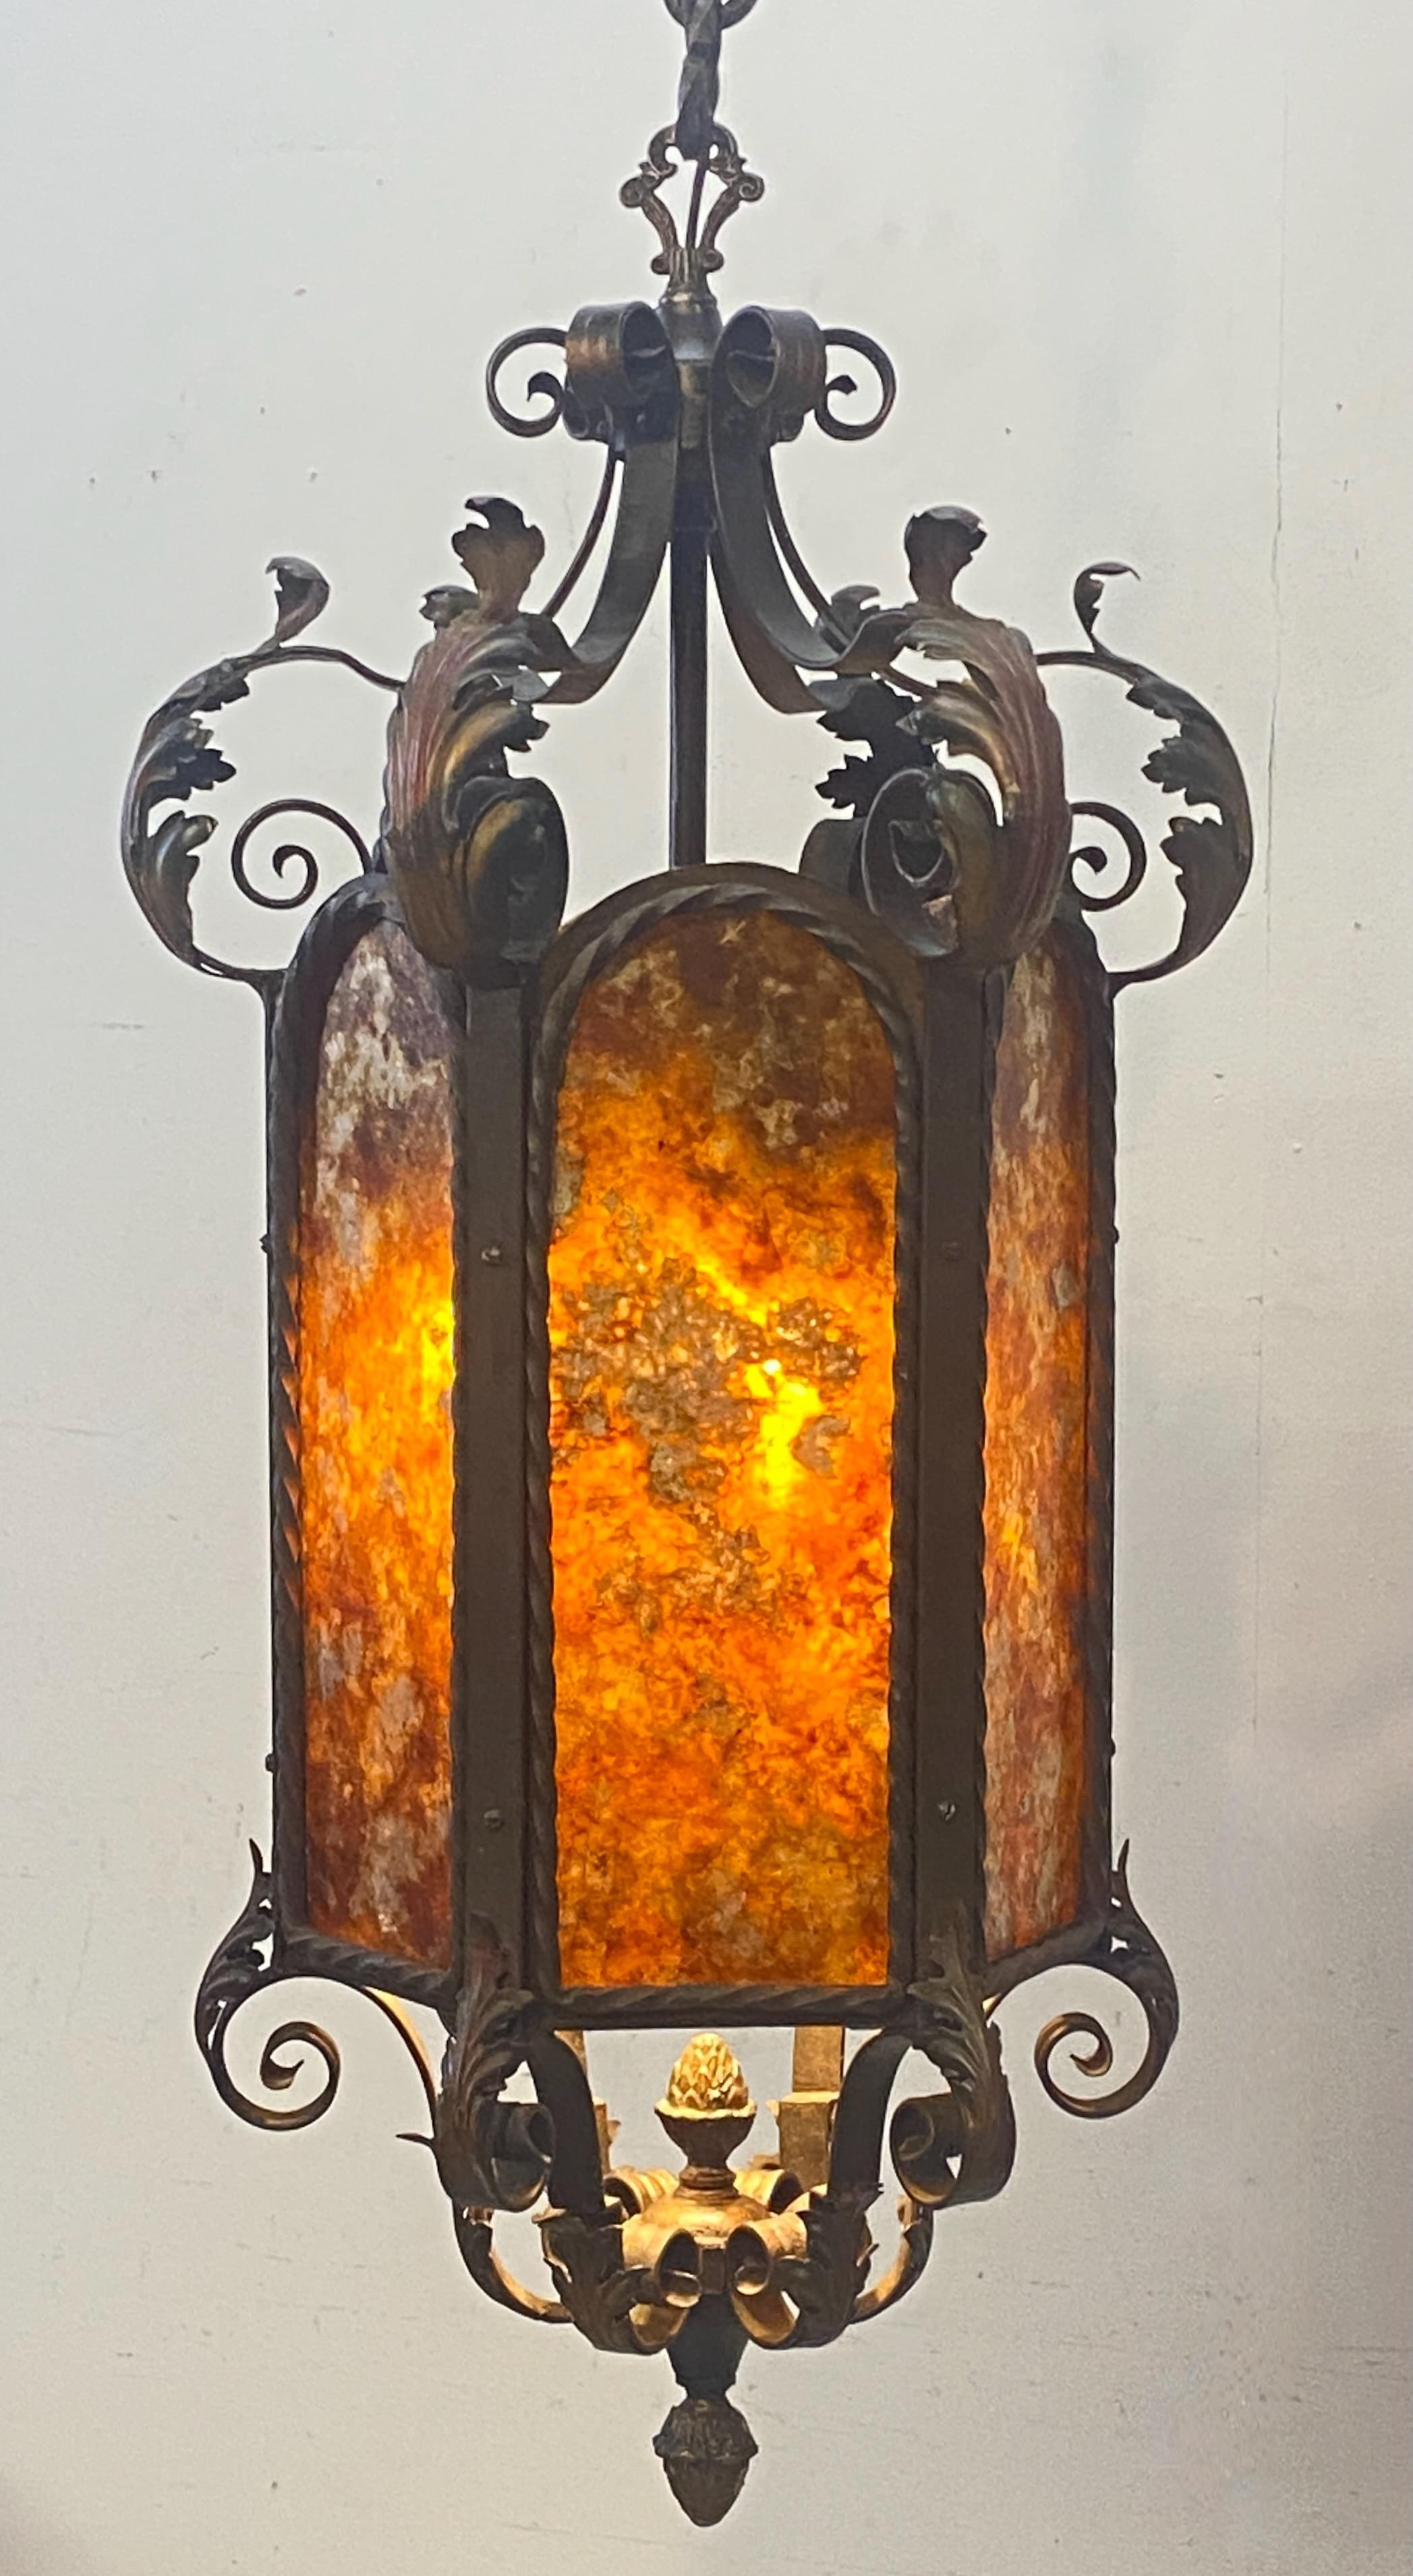 An exceptional antique wrought iron lantern with painted steel applied foliage and mica panels. Three light cluster, recently rewired and reconditioned. Ready to install.
Measurement of length with chain and canopy measures 58 inches. (We can